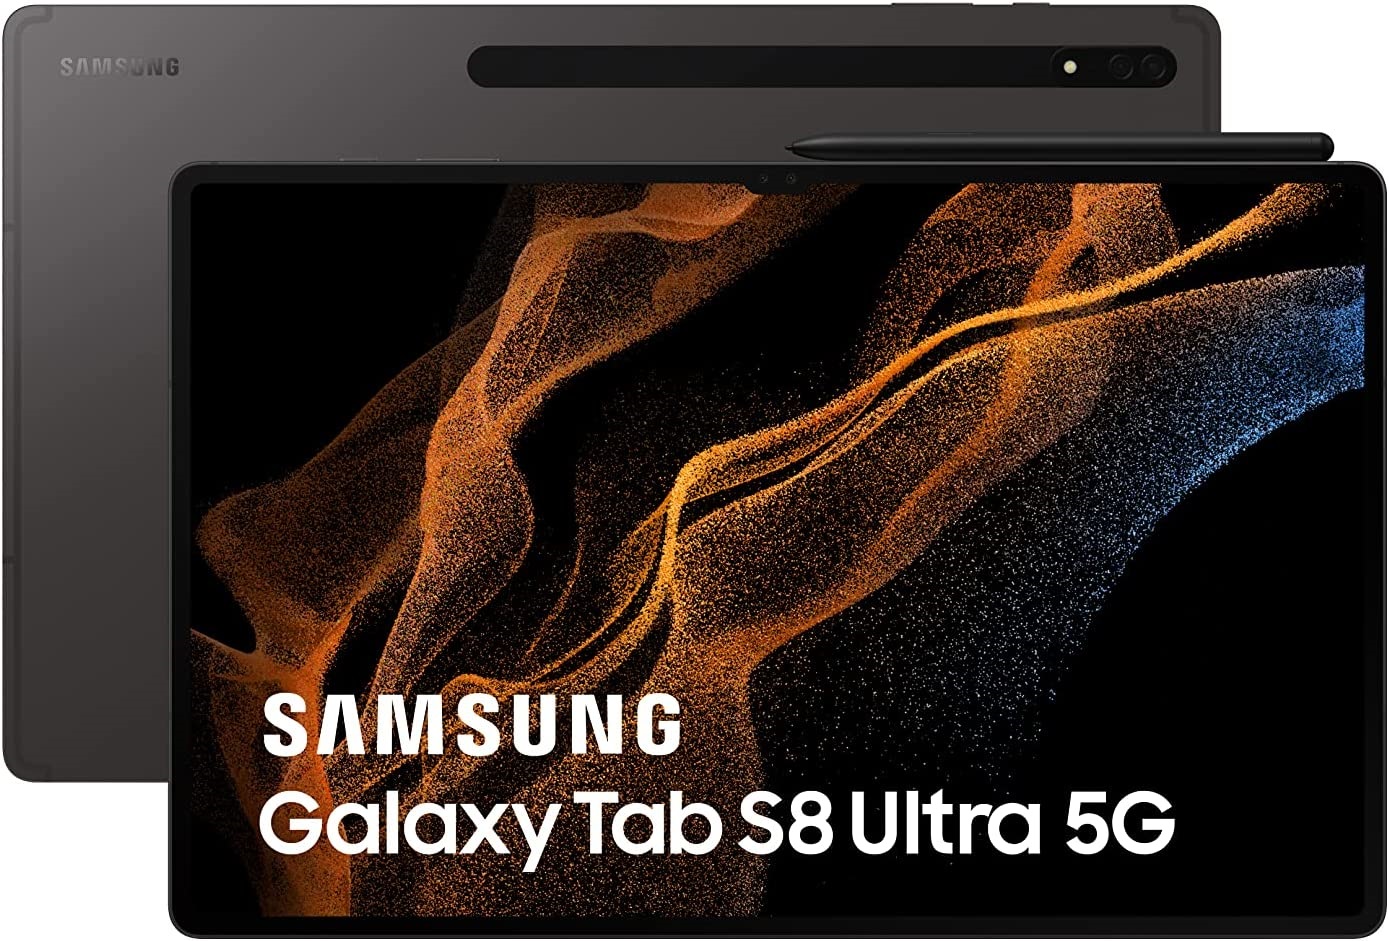 Galaxy Tab S8 Ultra : une tablette 14.6 avec clavier sous Android